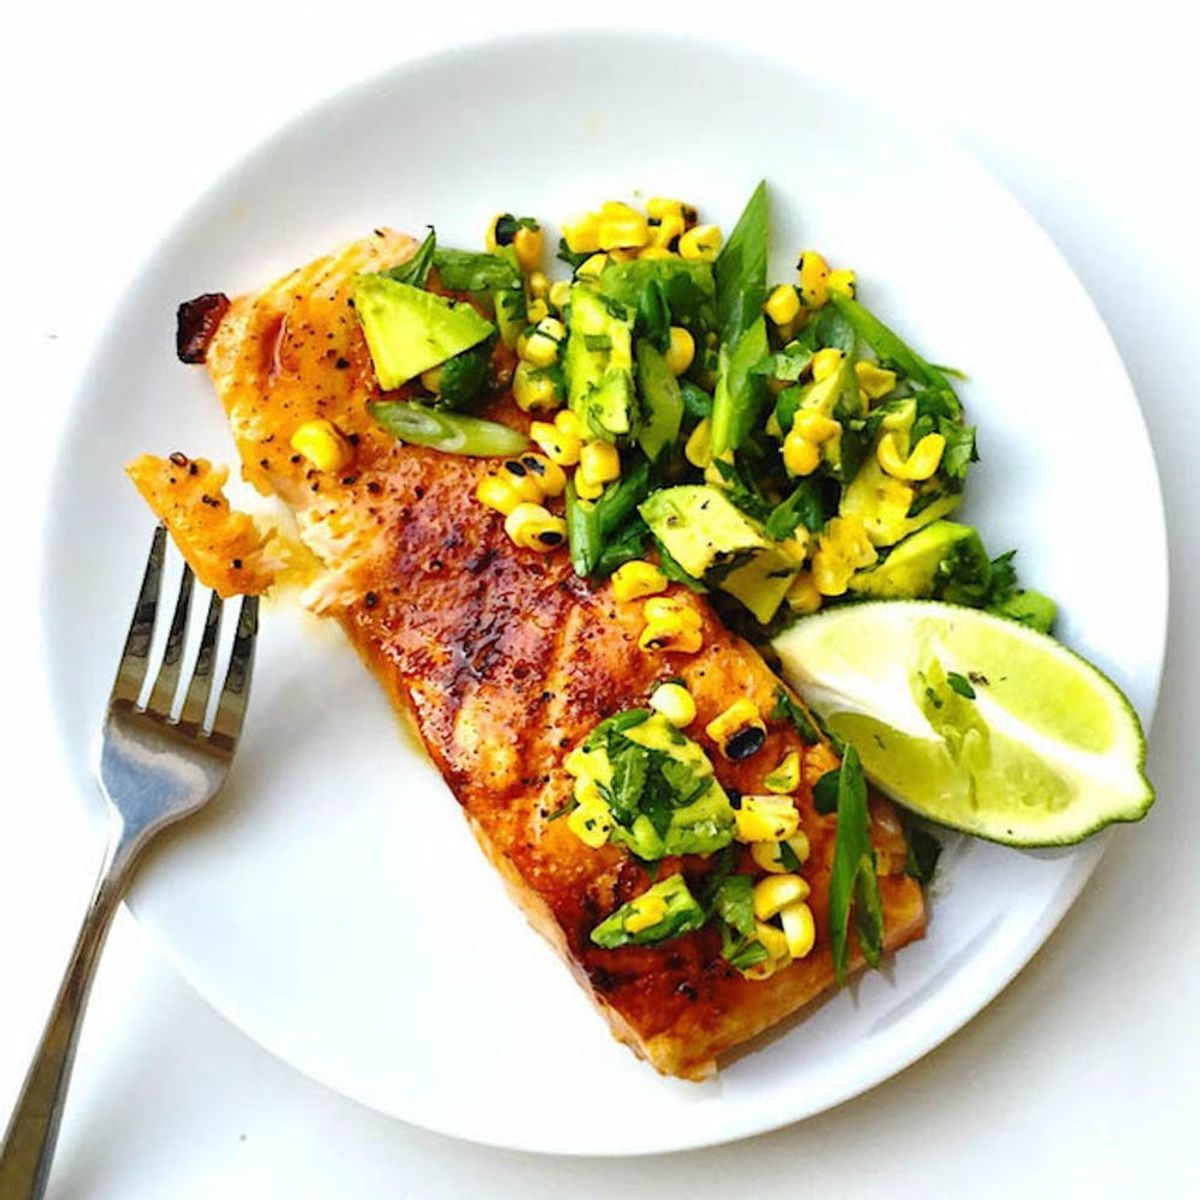 14 Healthy Recipes for Grilled Fish to Kick Off Warm Weather